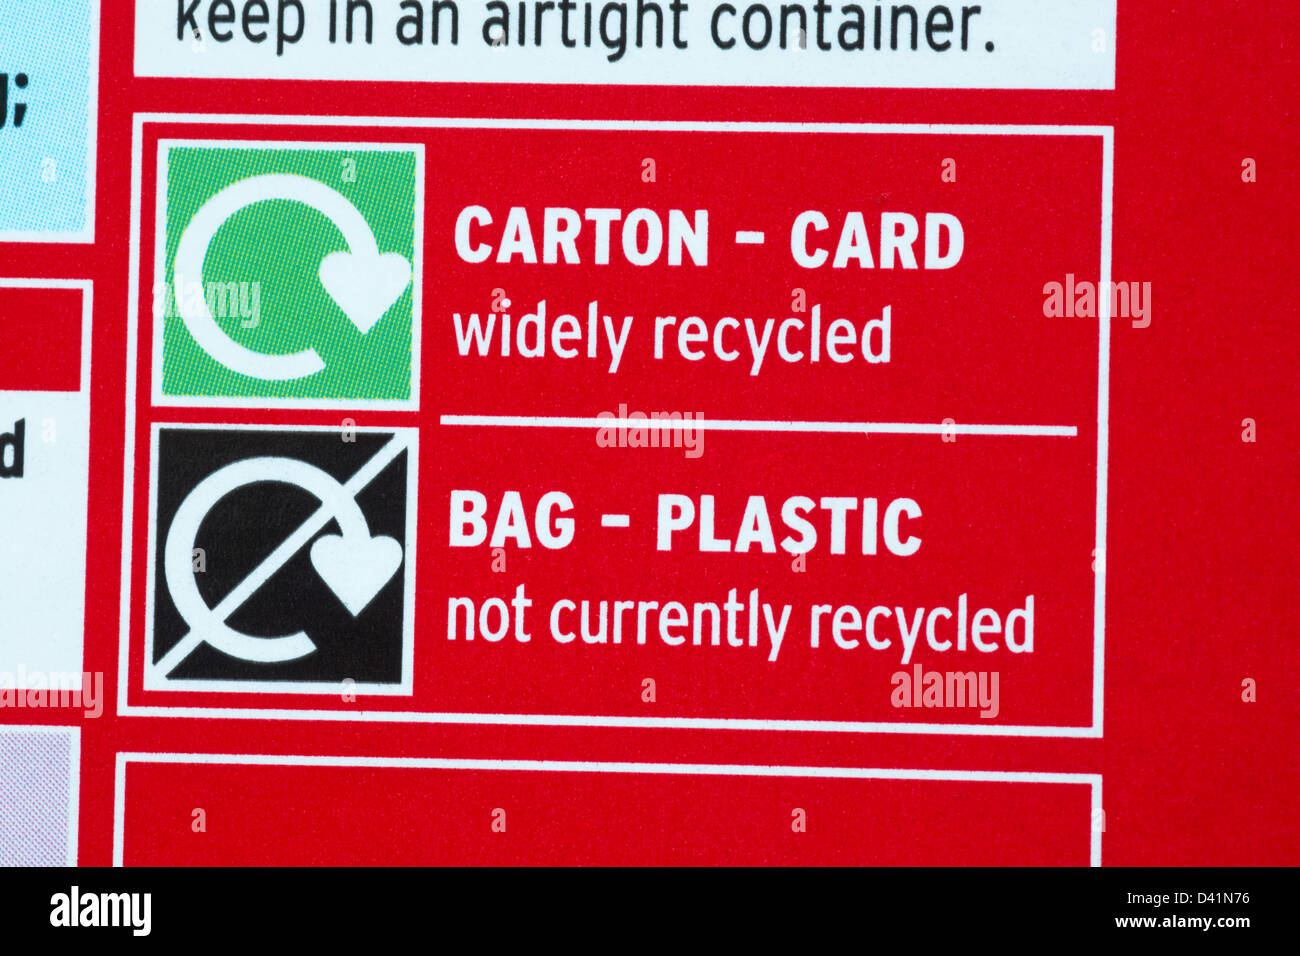 recycling information on box - carton card widely recycled bag plastic not currently recycled - disposal recycling recycle logo symbol Stock Photo